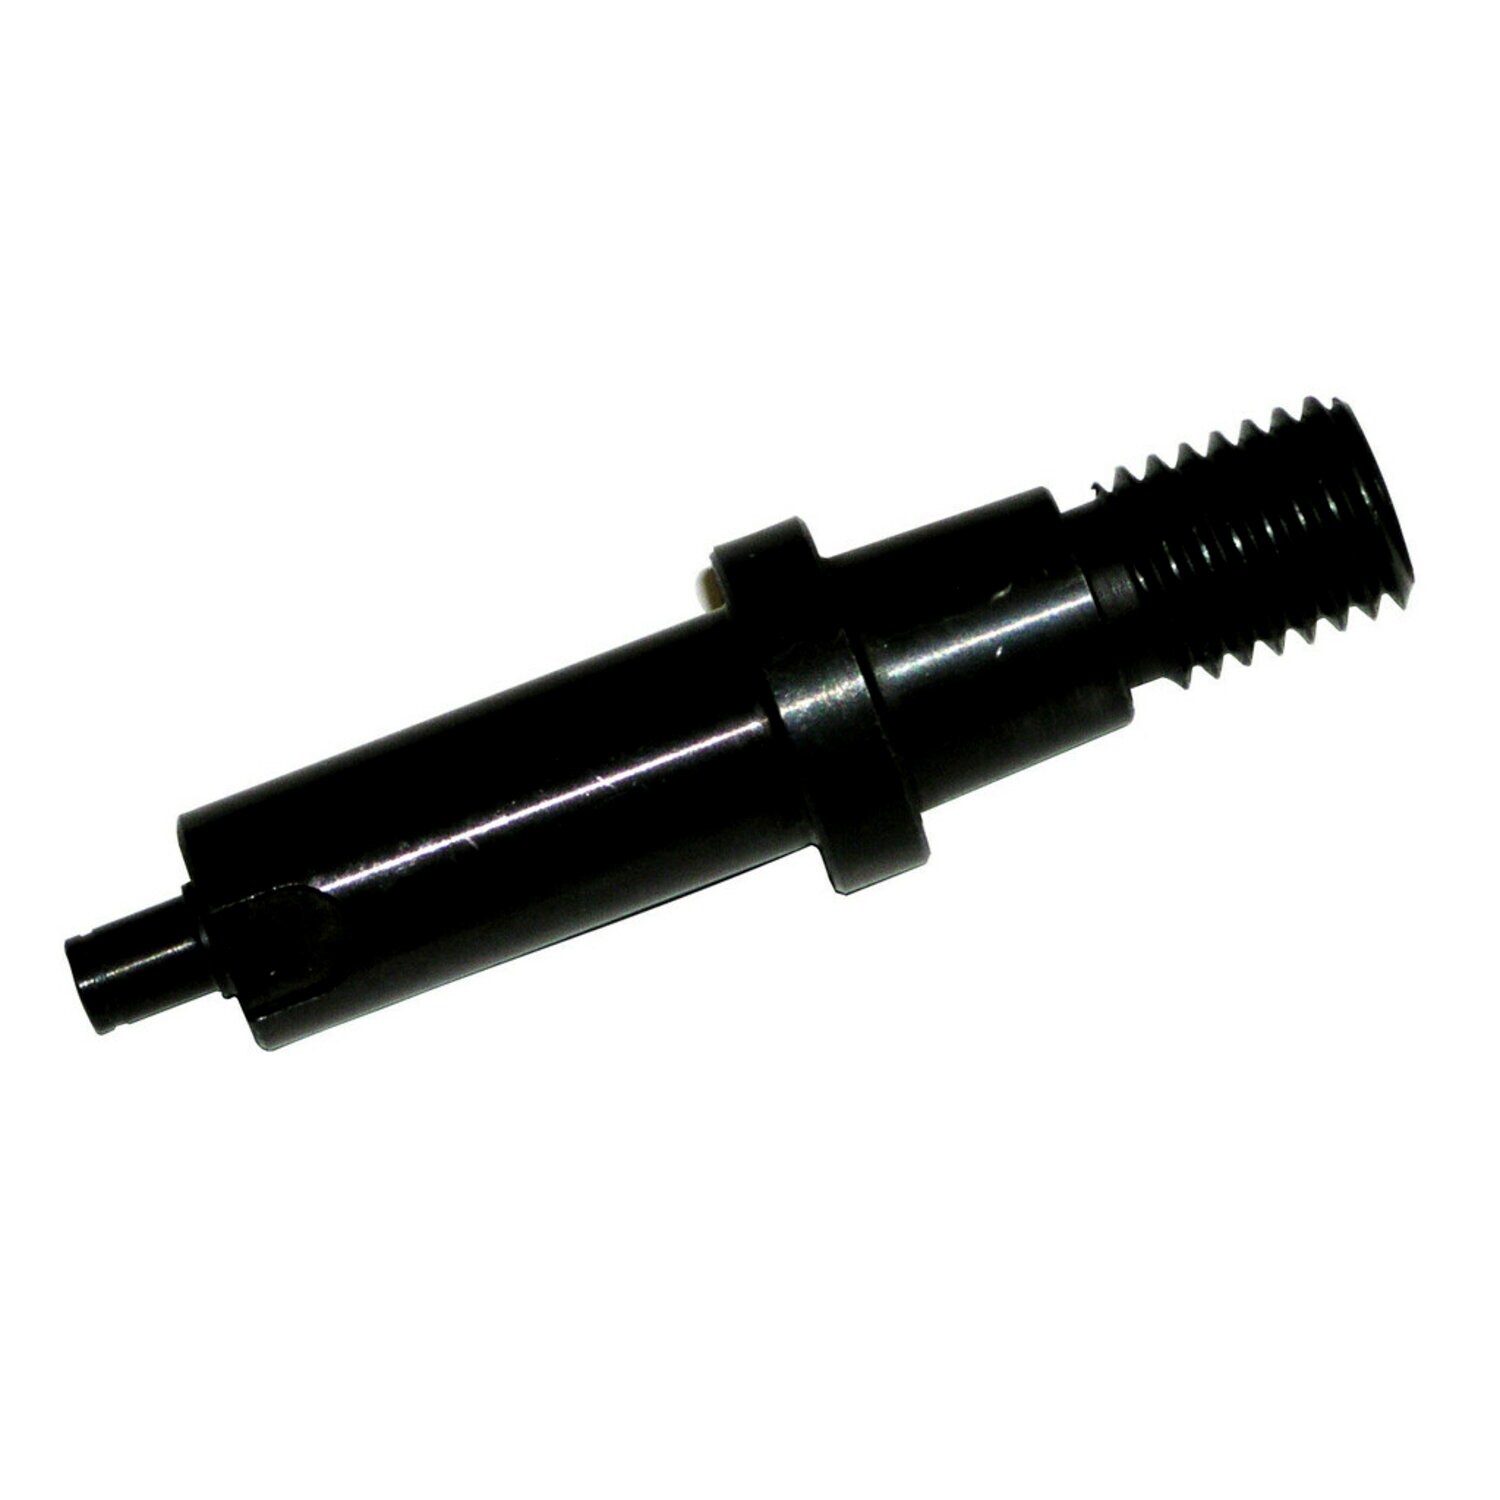 7010326942 - 3M Spindle 5/8 in-11 54057